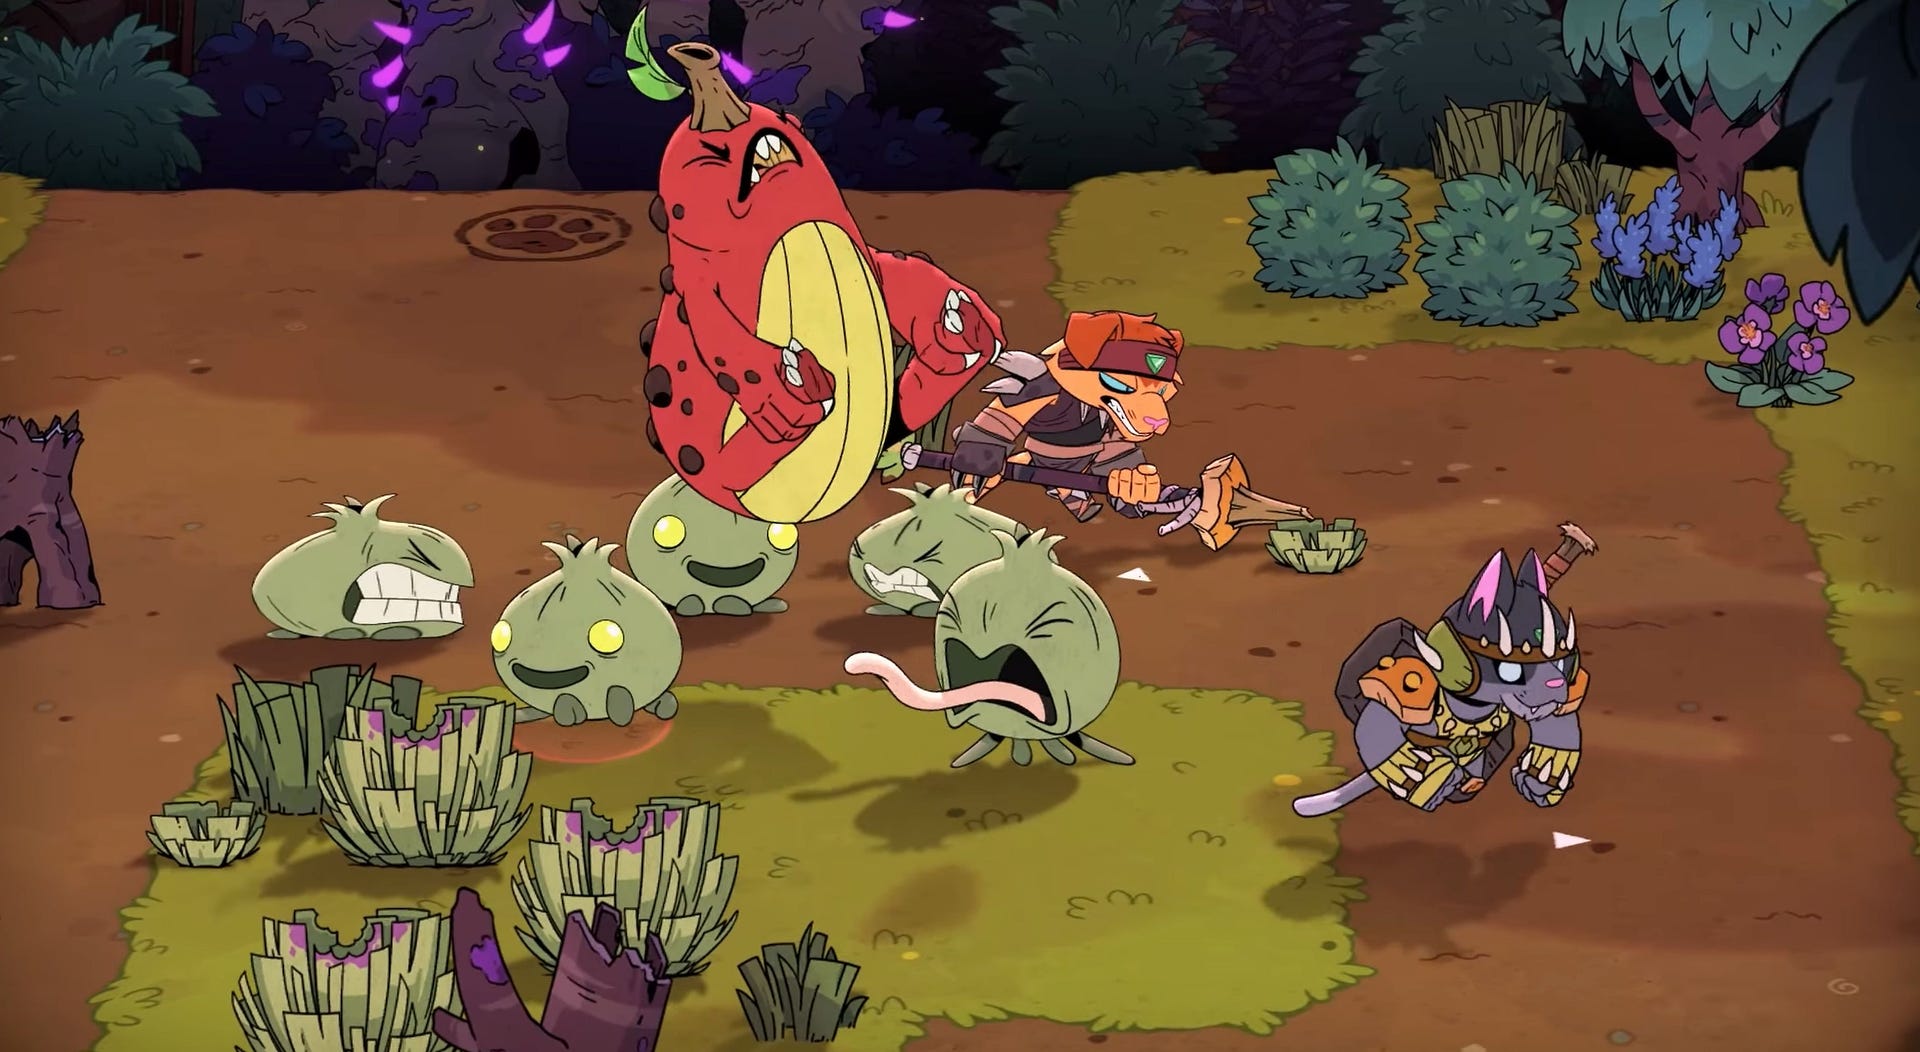 Don't Starve studio's co-op roguelike Rotwood sprouts on Steam Early Access: Jump into a world of monstrous encounters for less than a value meal